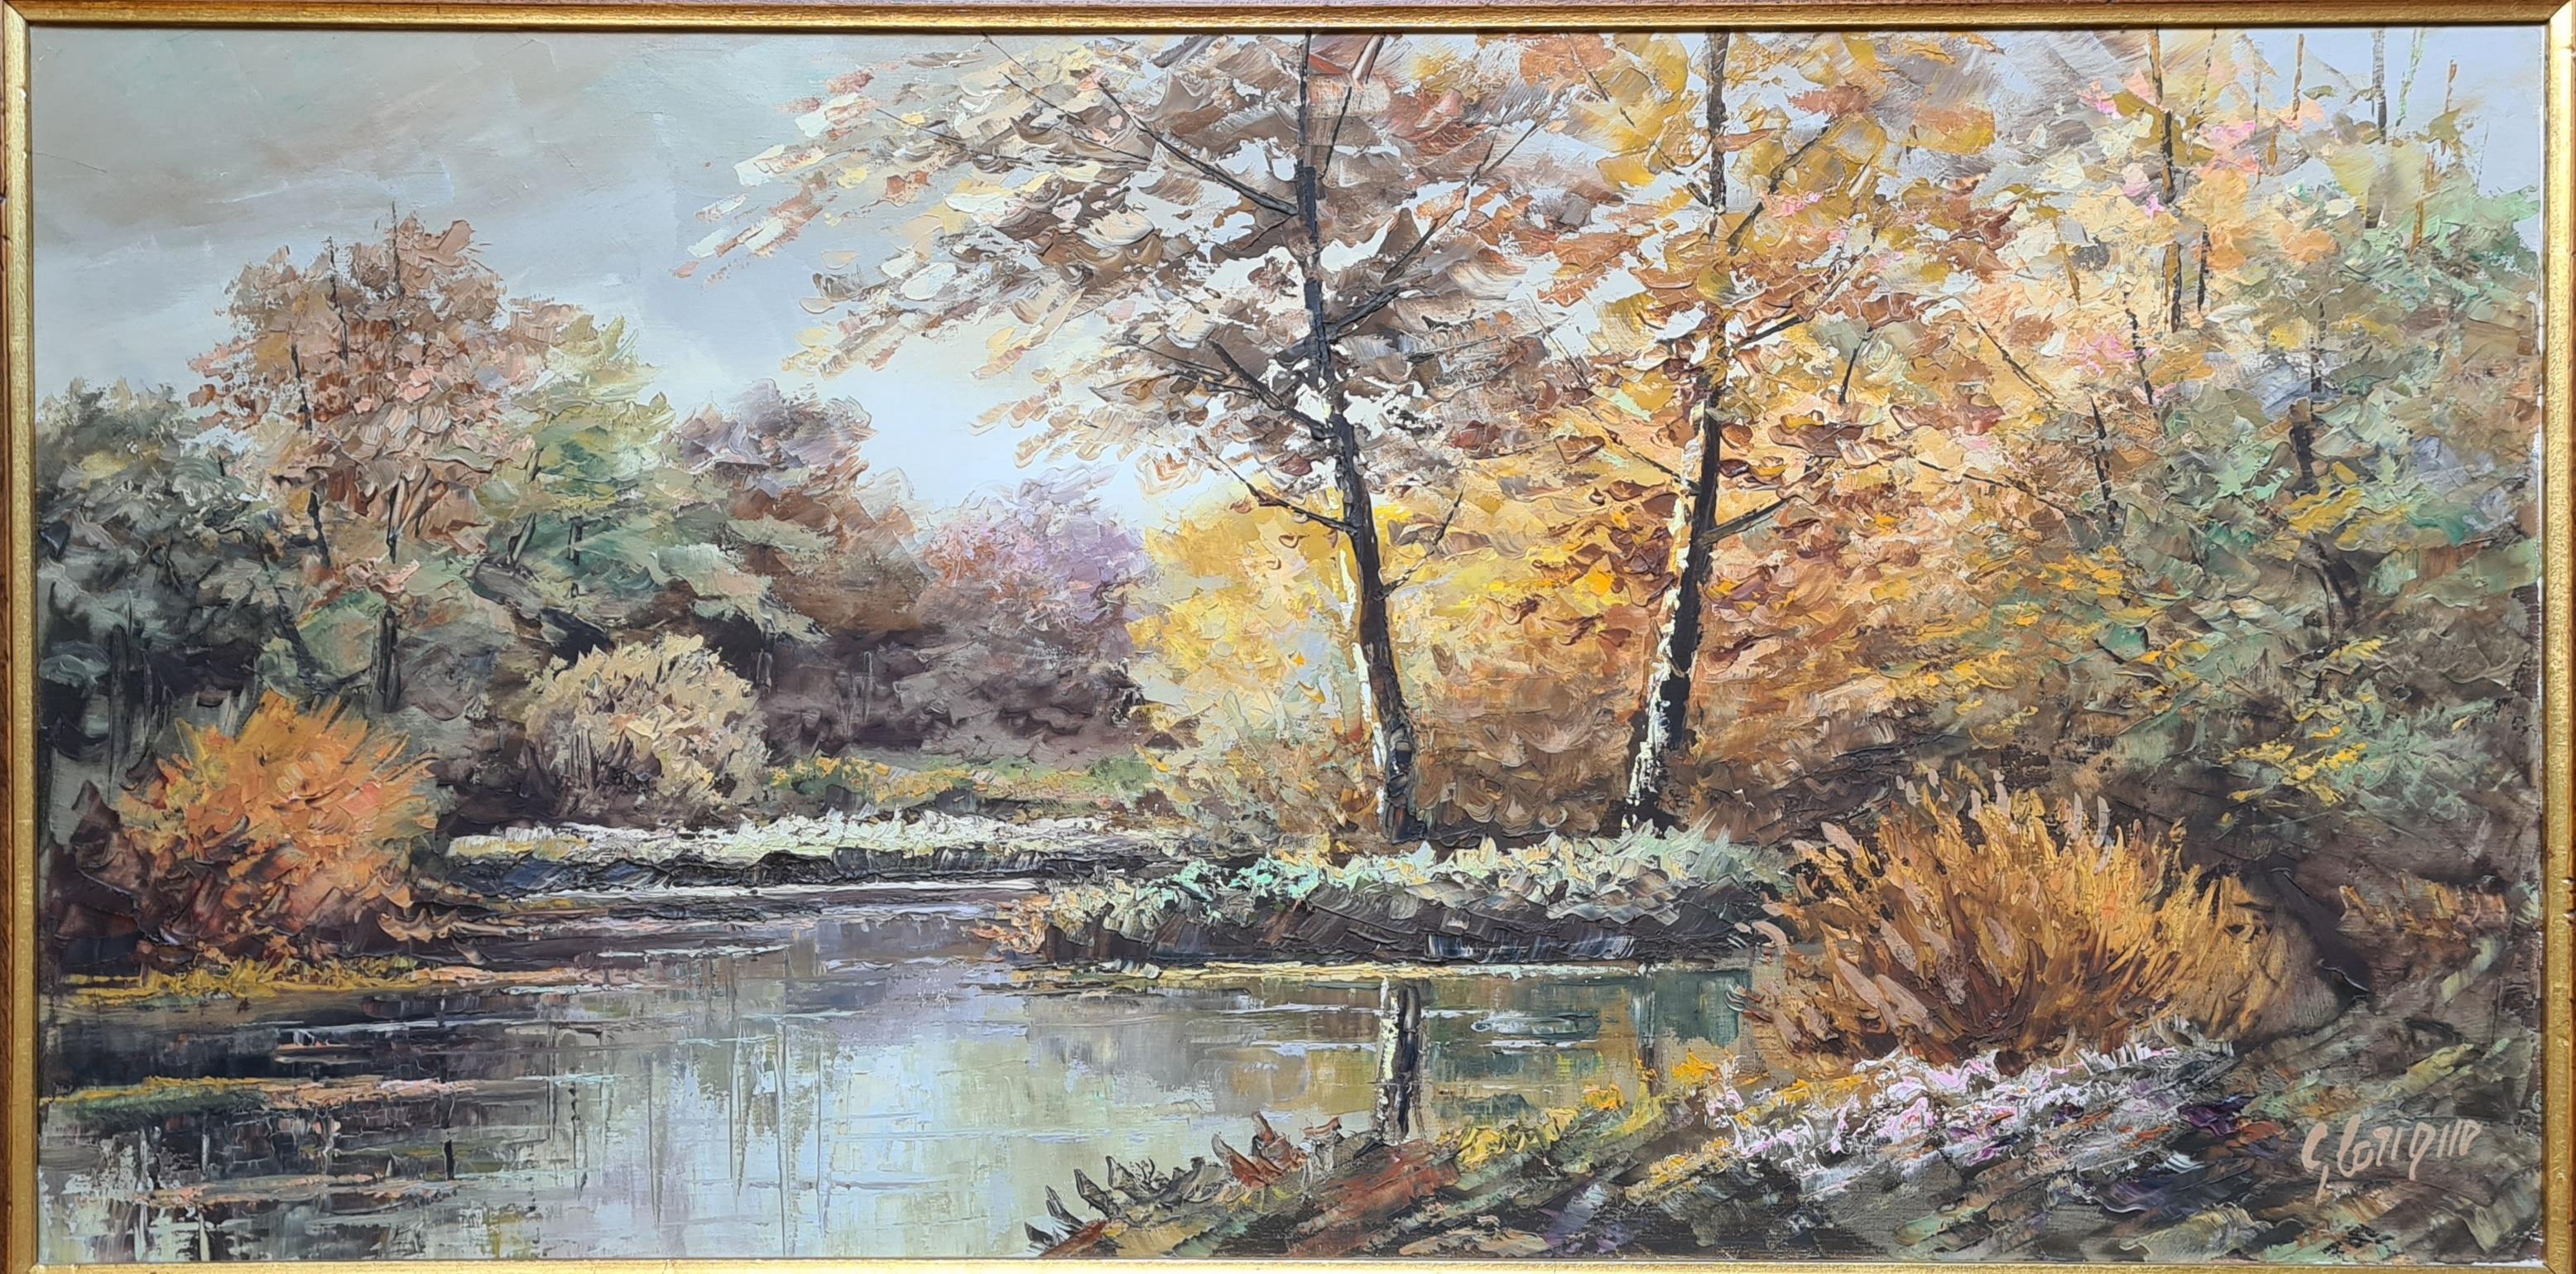 Autumn at the Riverbank, Large Scale French Rural Landscape. Oil on Canvas.